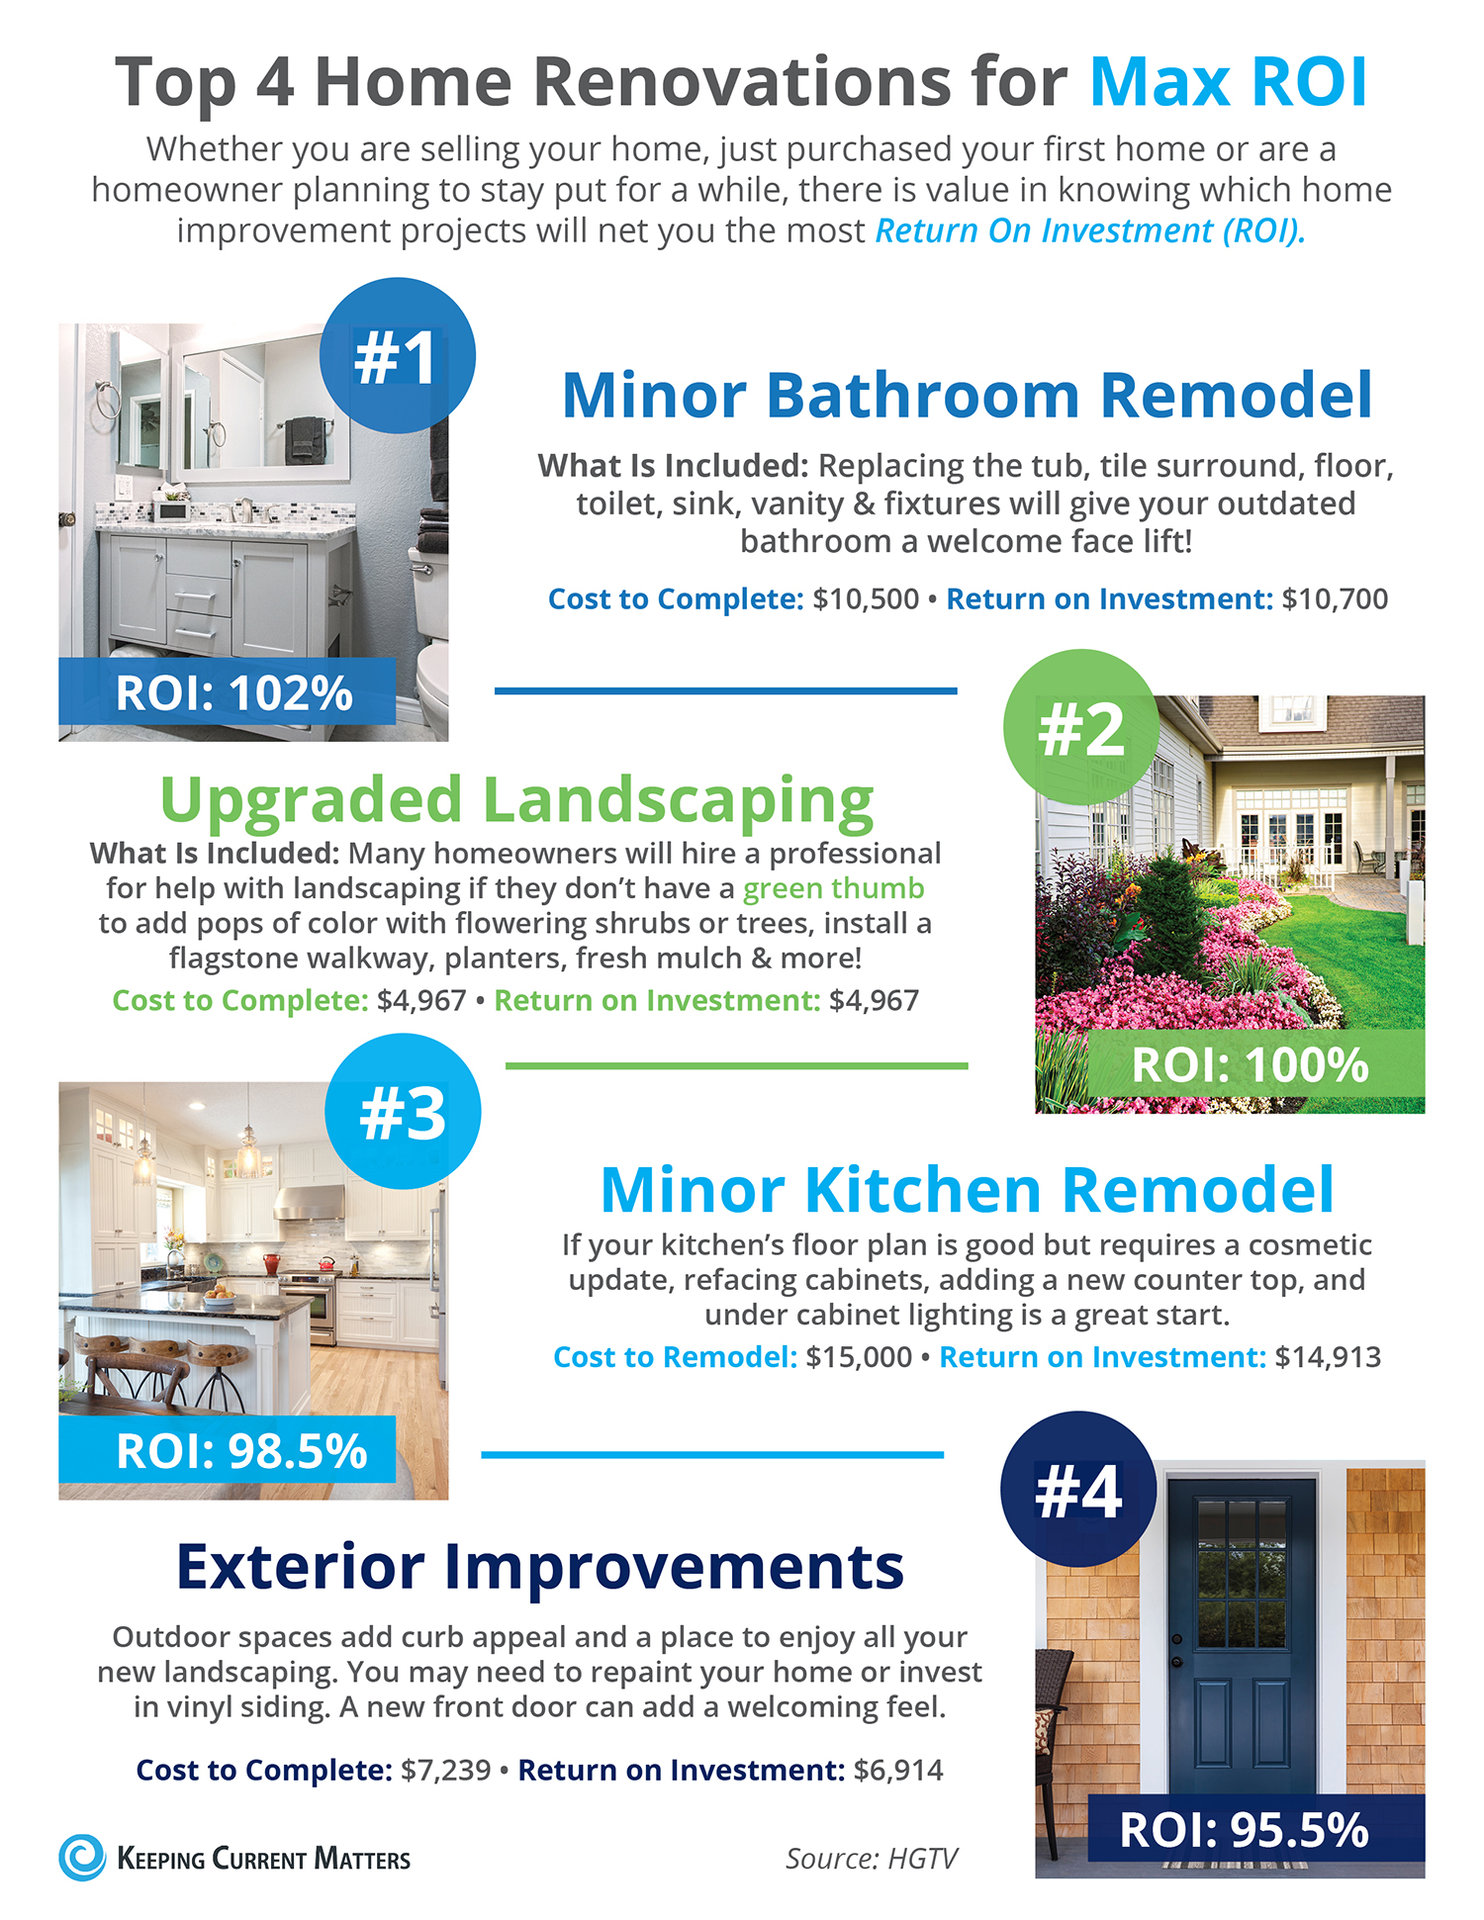 Top 4 Home Renovations for Max ROI [INFOGRAPHIC] | Keeping Current Matters